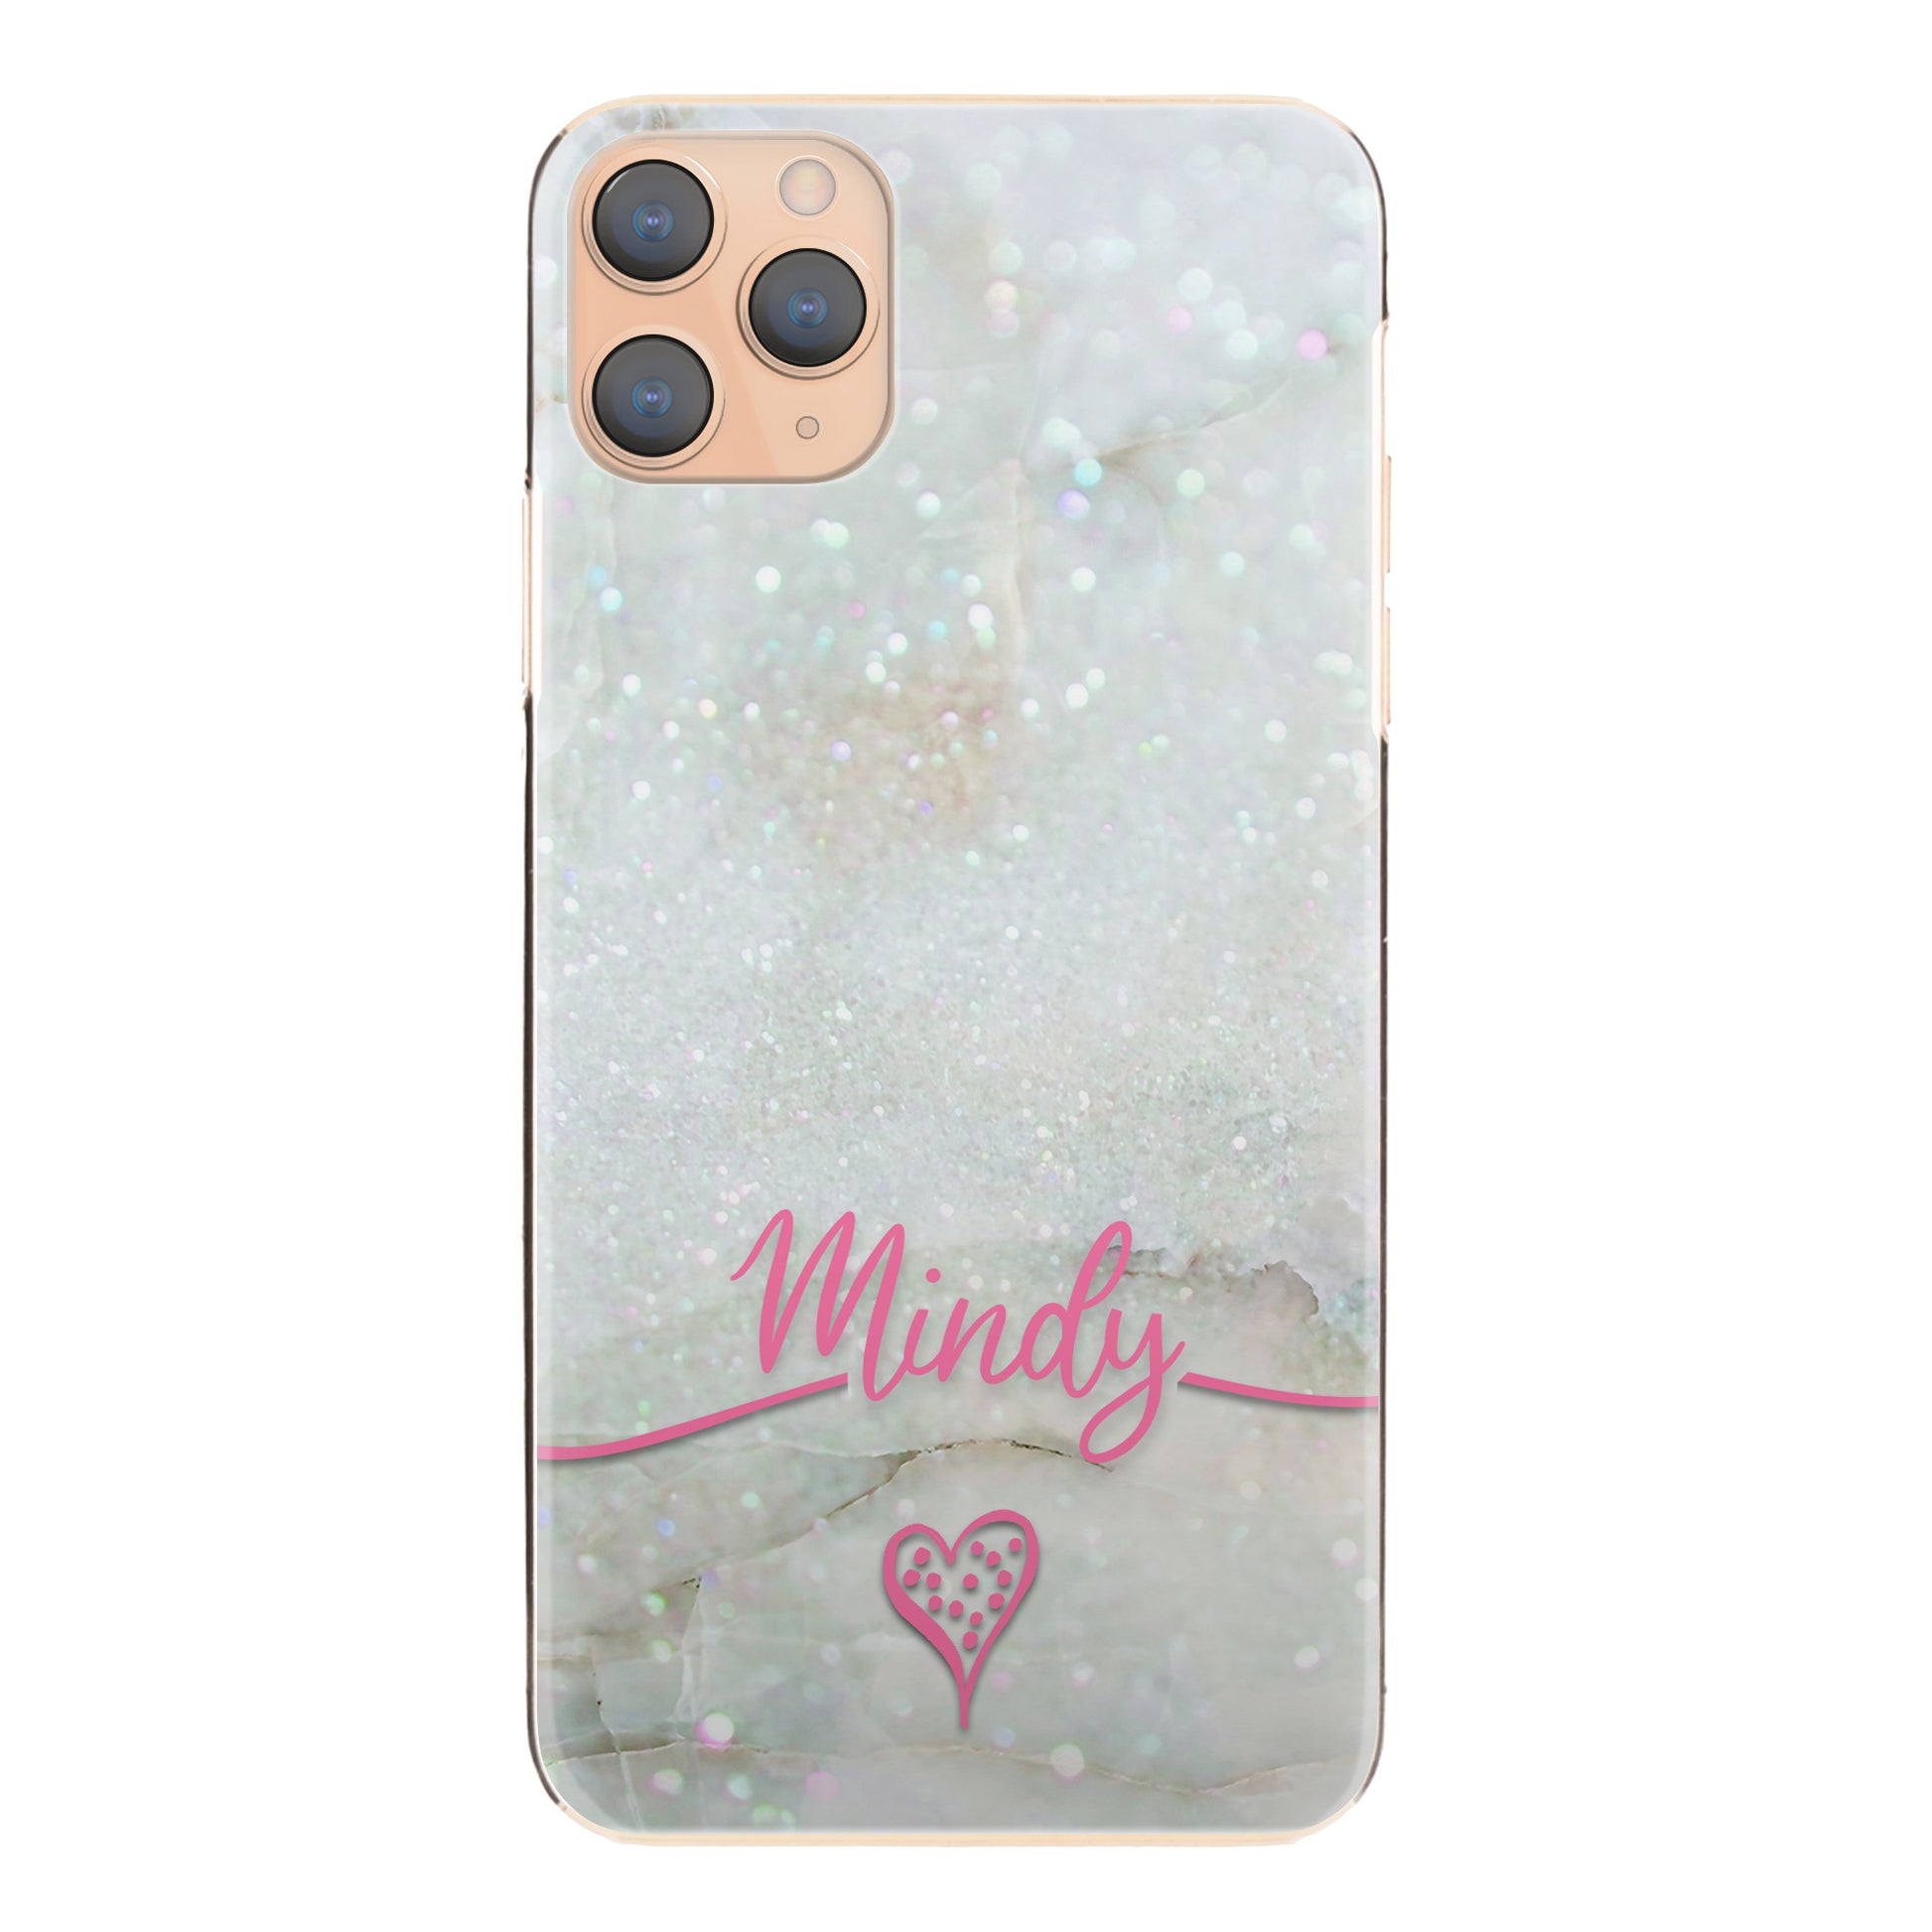 Personalised Motorola Phone Hard Case with Heart Accented Pink Text on Crystal Marble